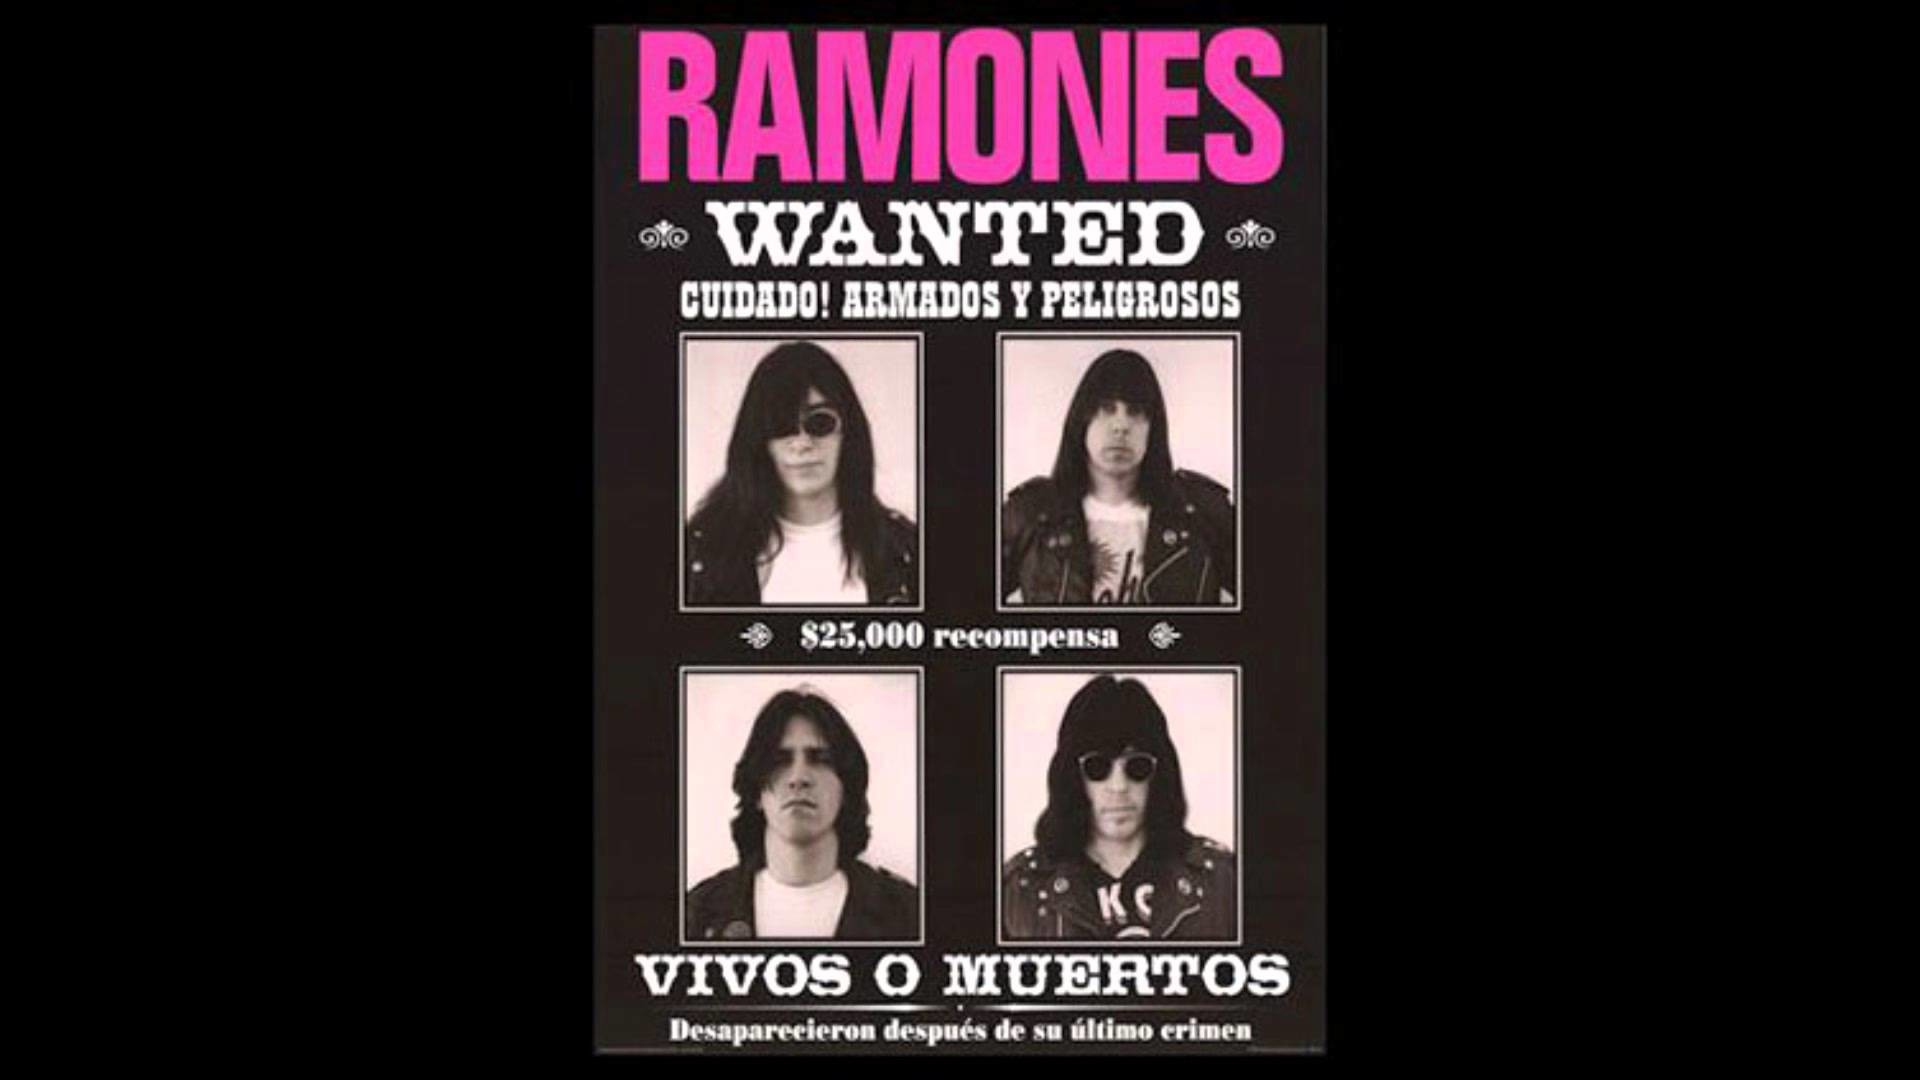 1920x1080 The Ramones - Howling at the Moon (Live)